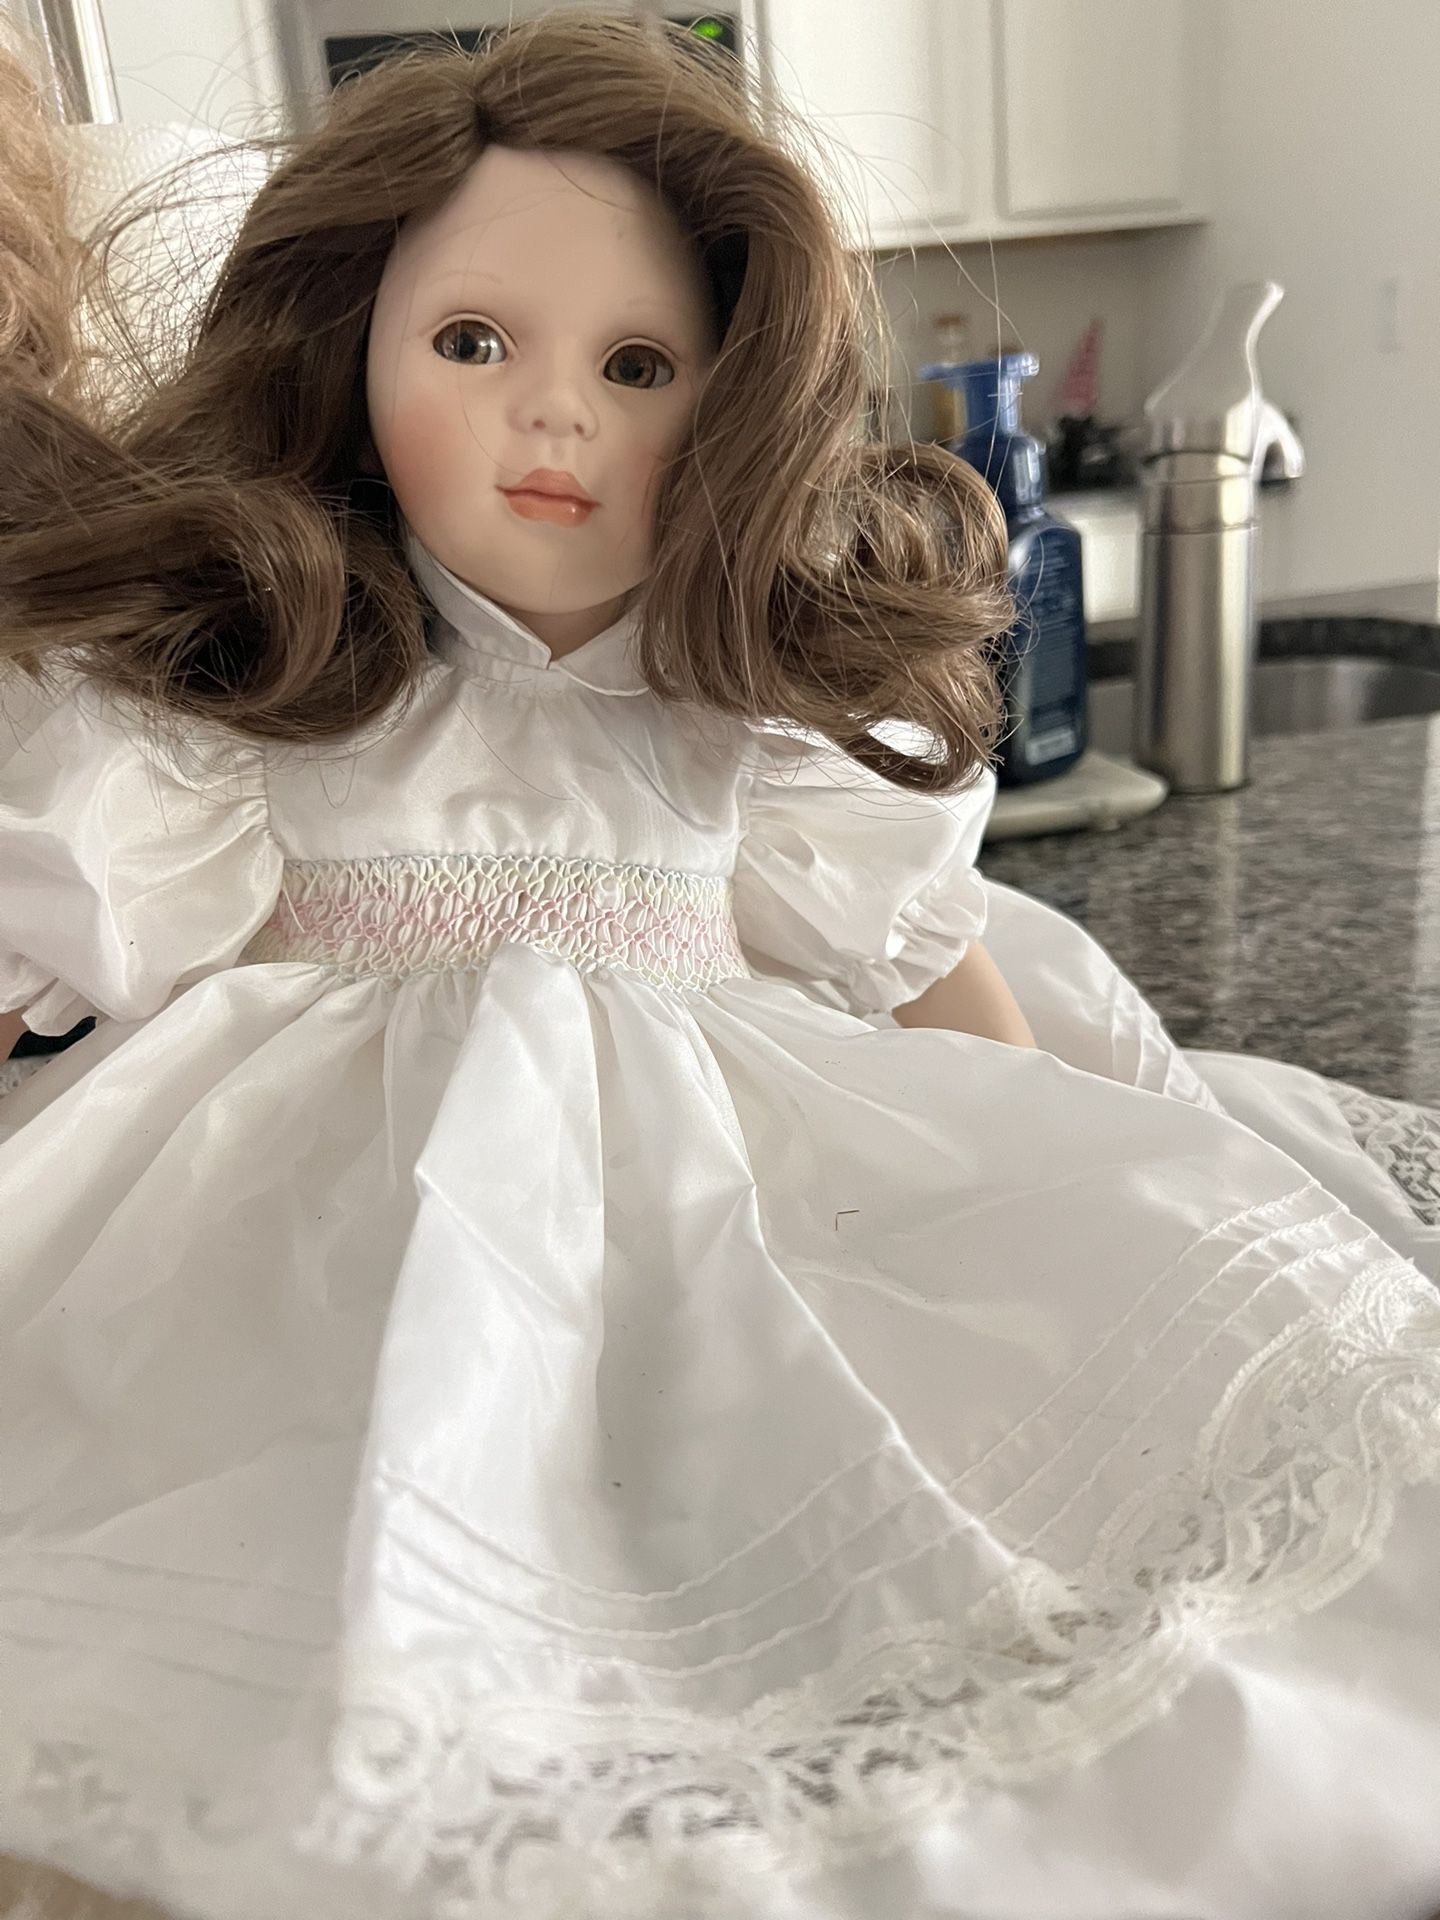 Doll Collectors!  Beautiful Porcelain Doll! Limited Addition